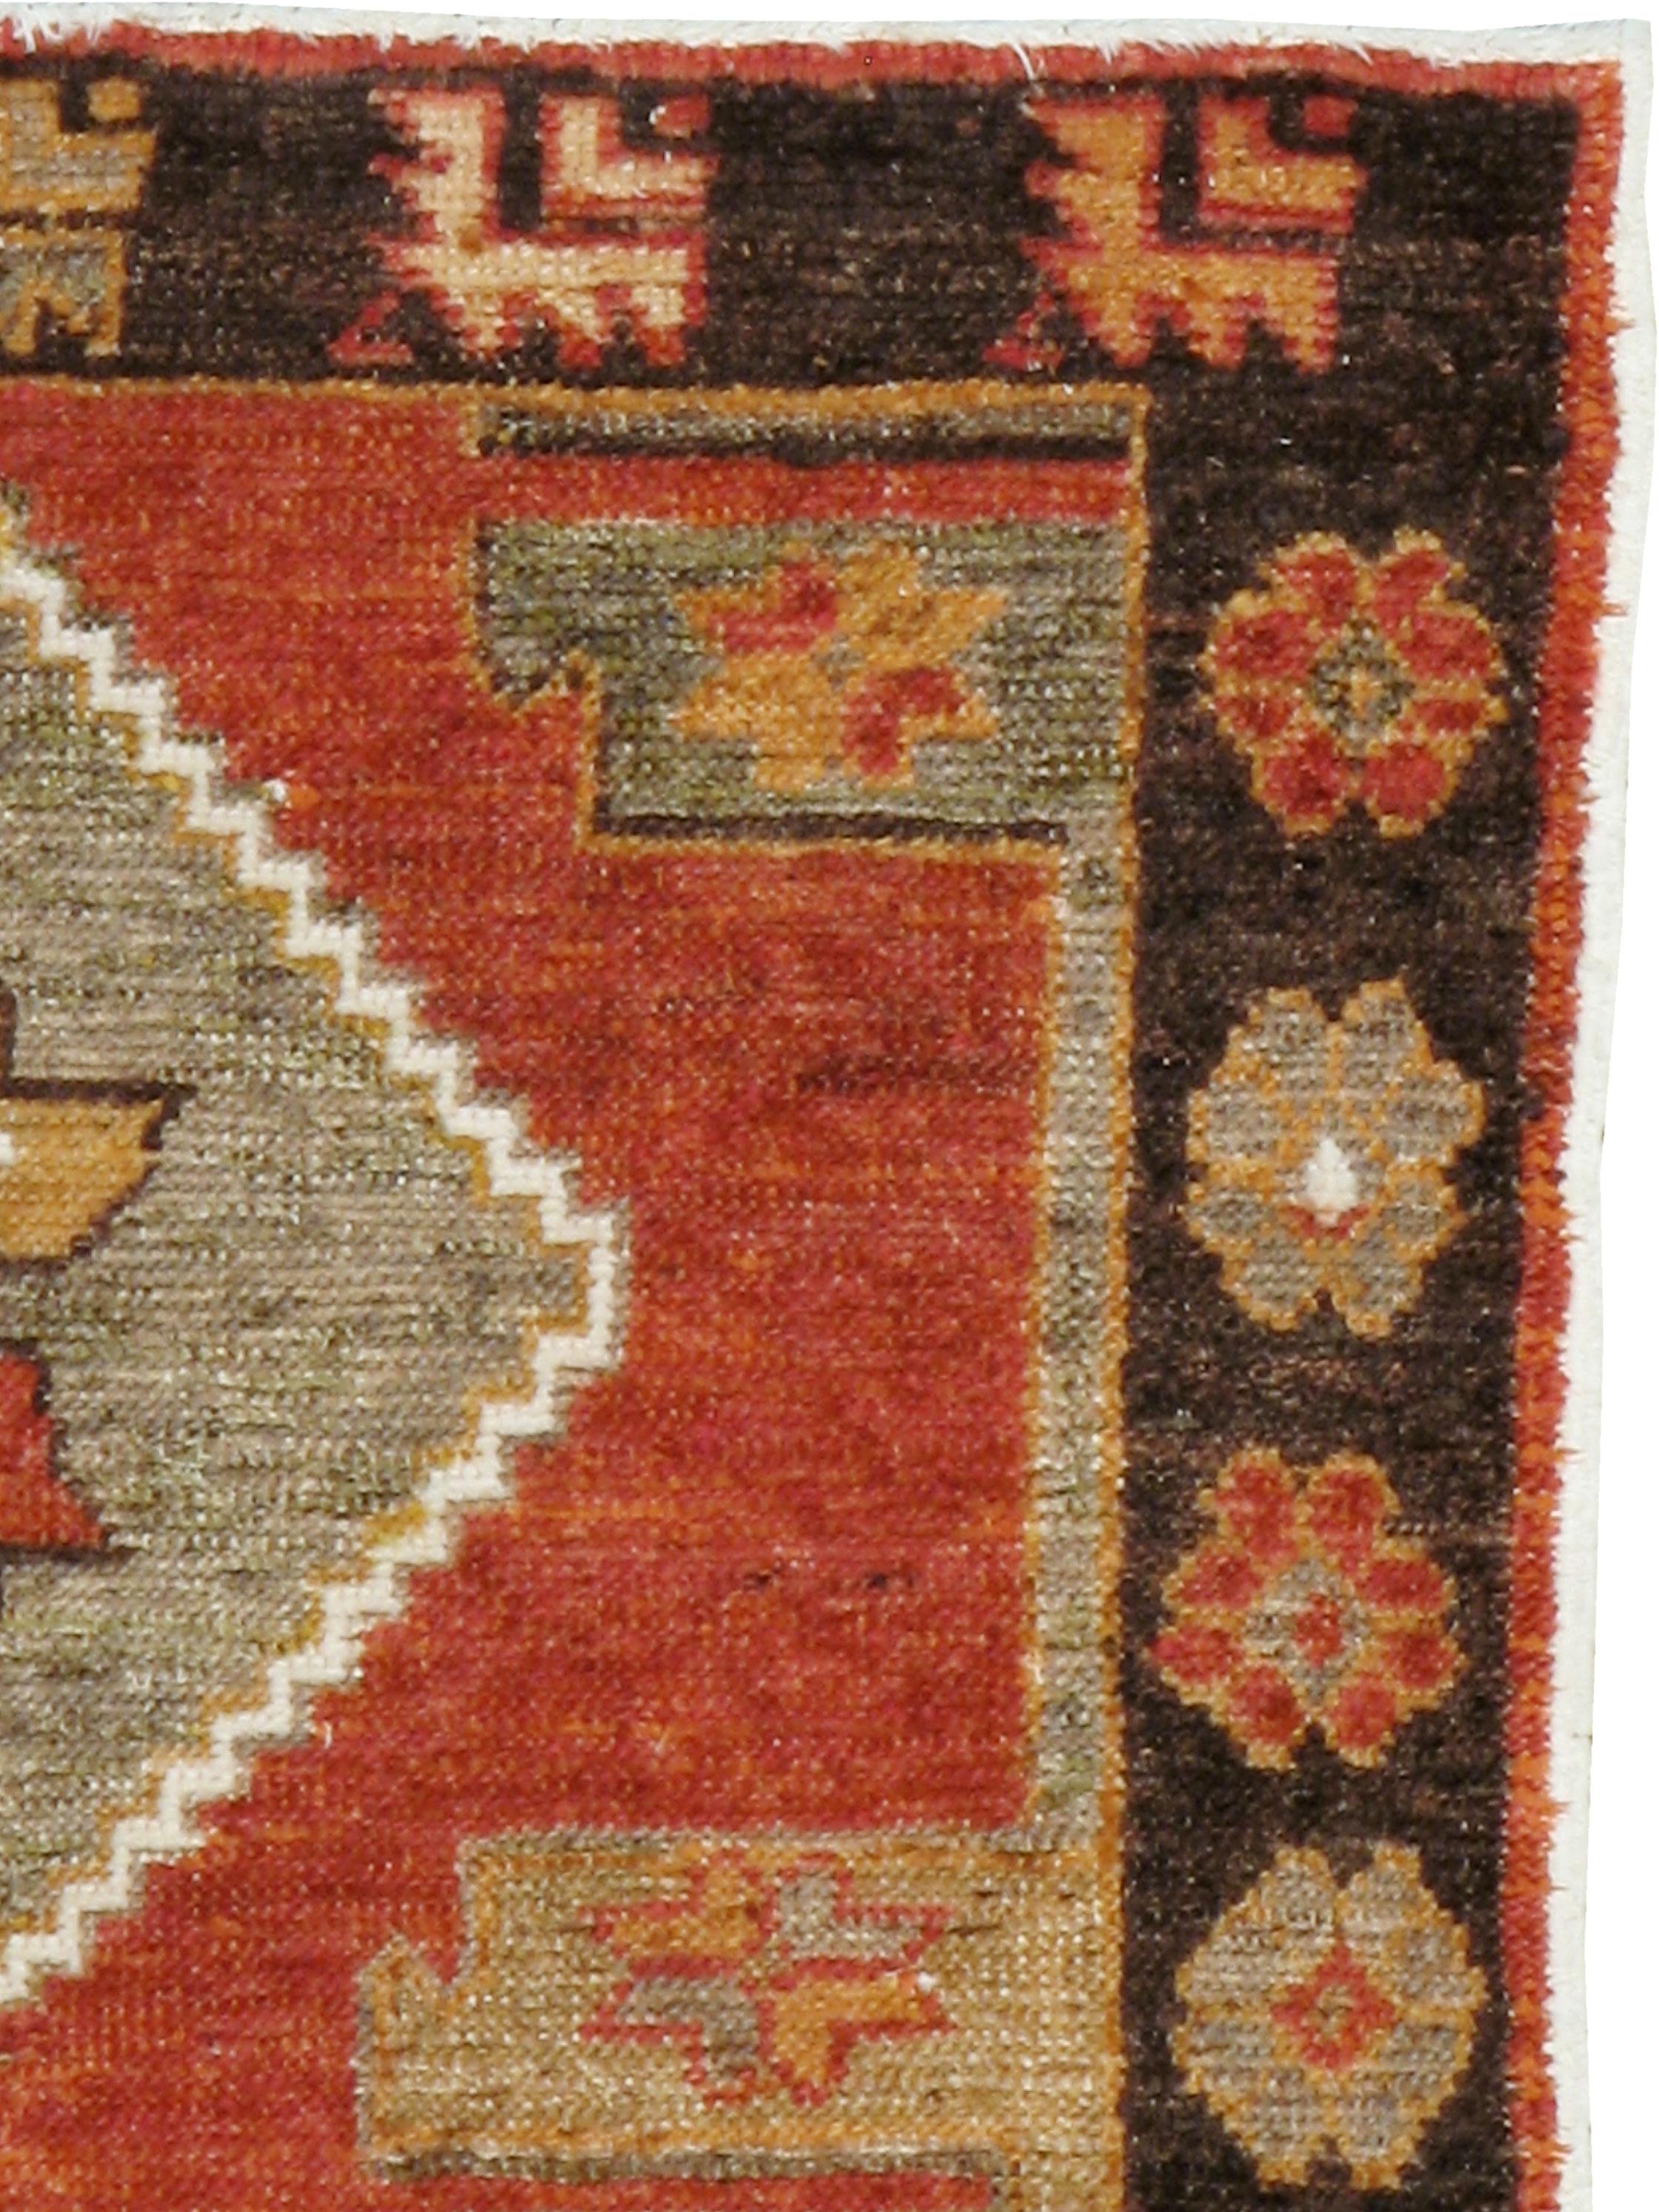 A vintage Turkish Anatolian rug from the mid-20th century.